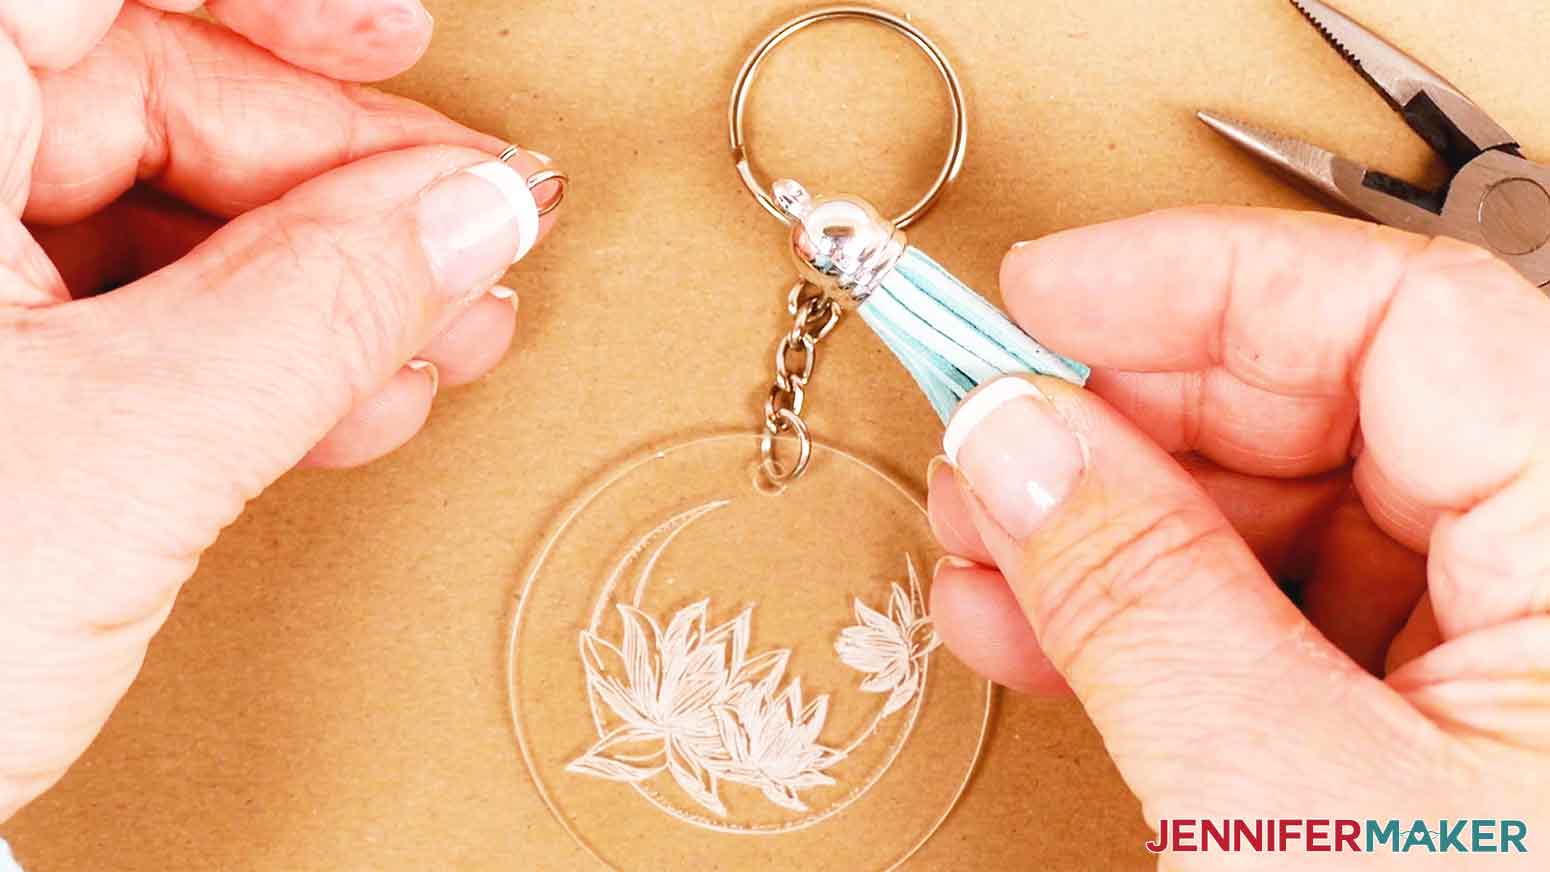 Attaching a tassel to your engraved acrylic keychain.